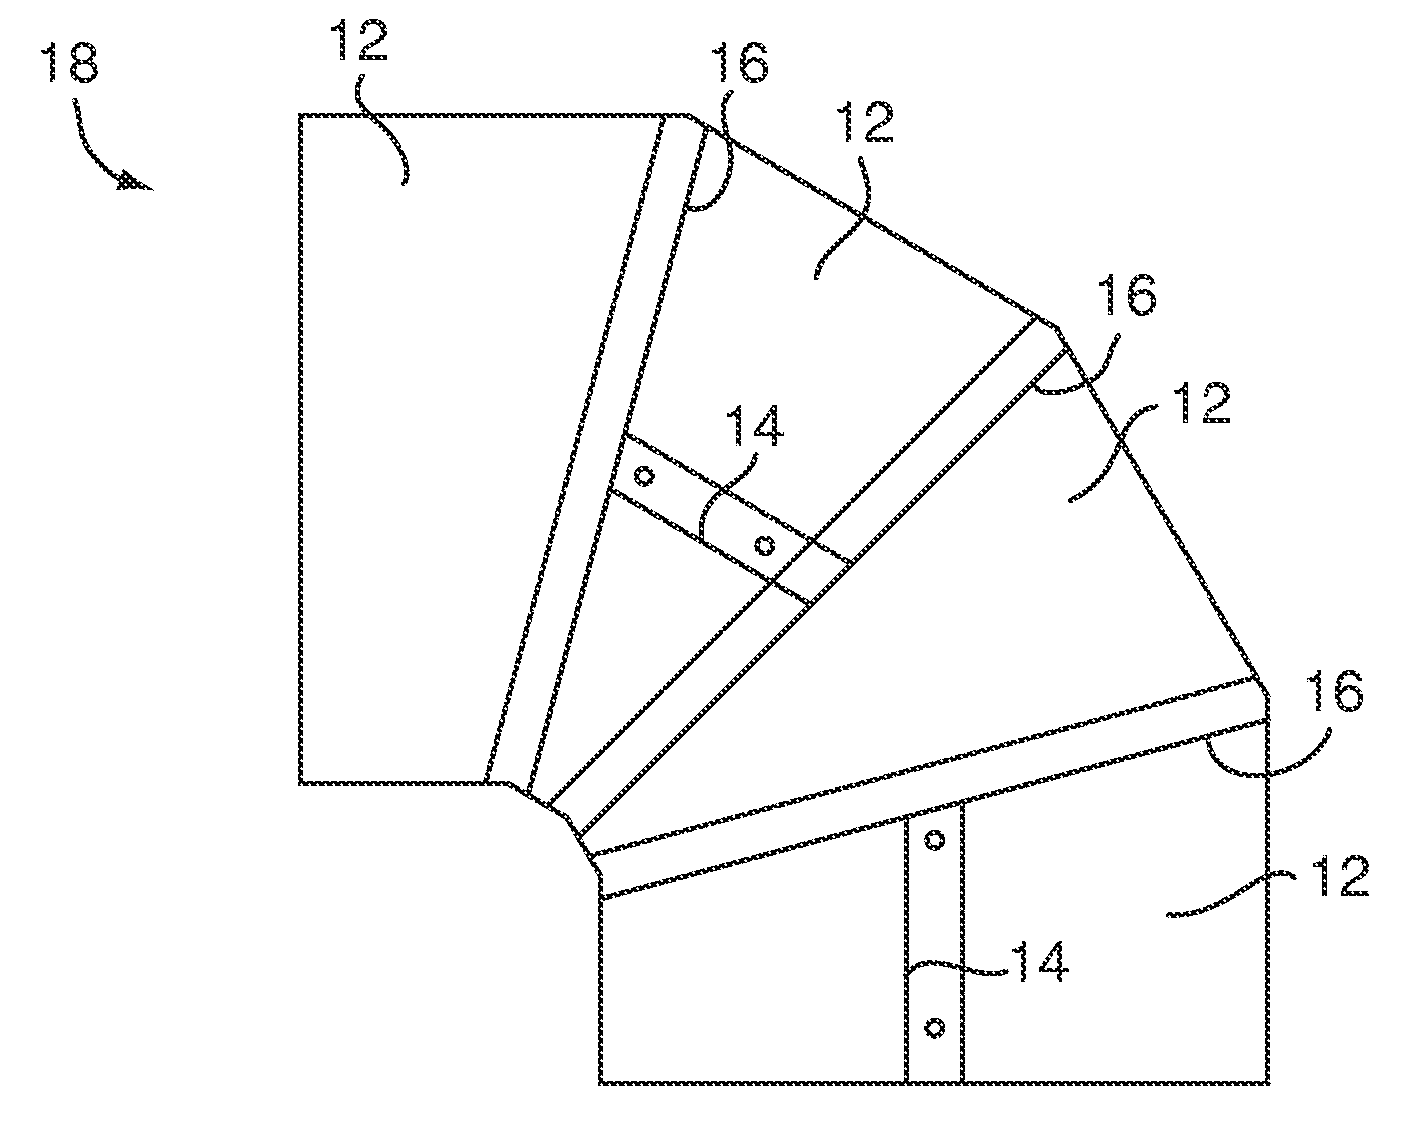 A formation and rotational apparatus and method for cylindrical workpieces